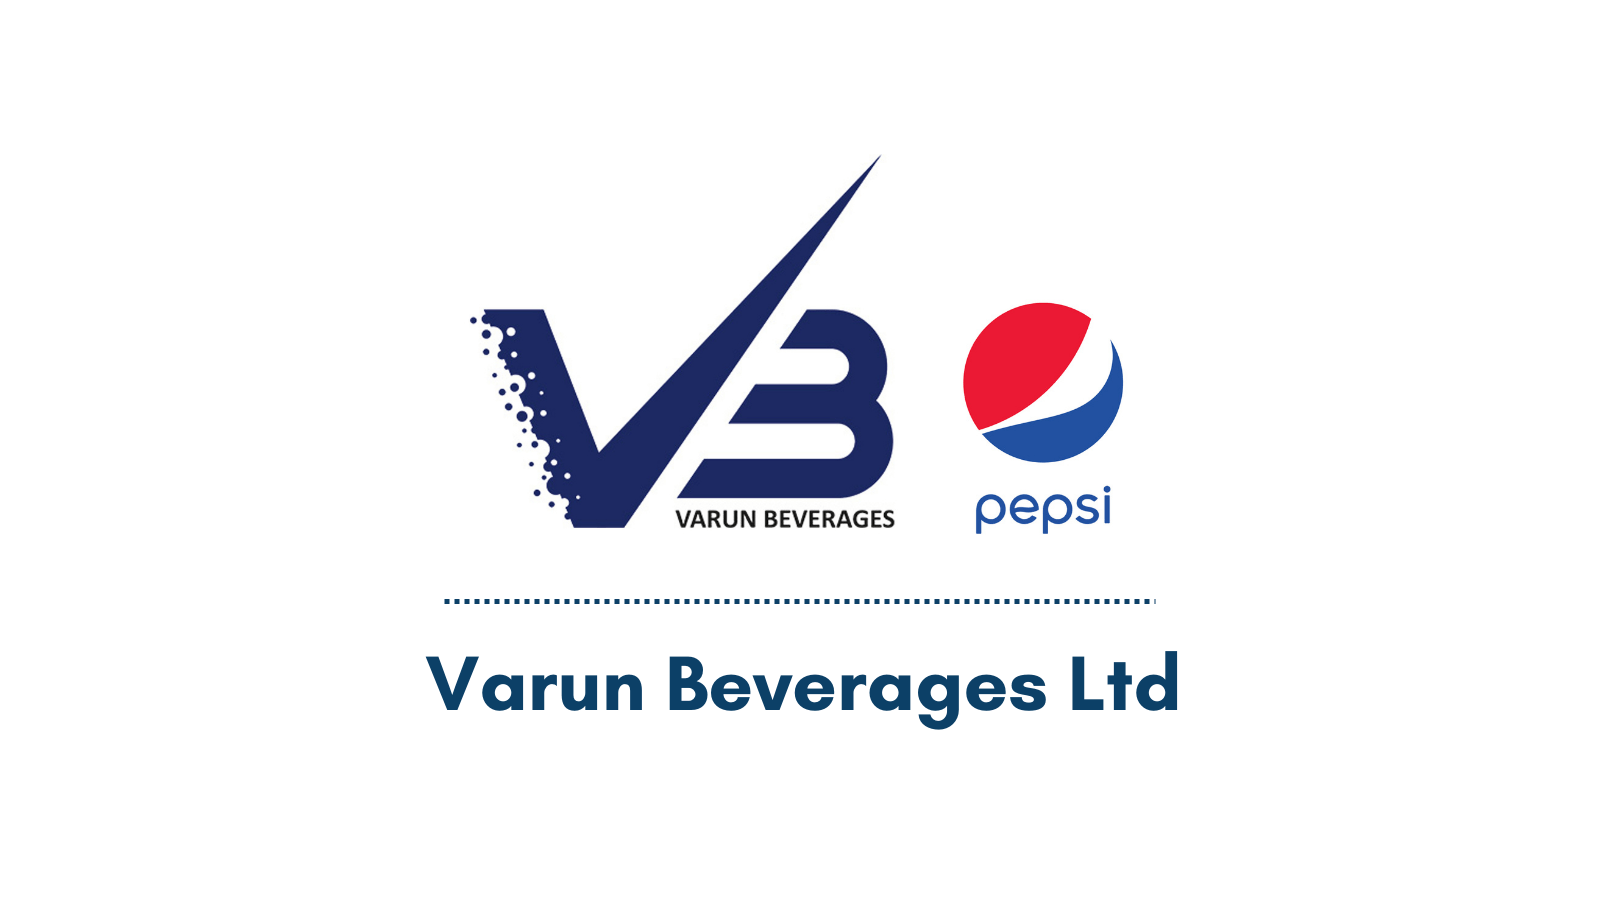 Varun beverages fast growth duopoly business - Stock Opportunities - ValuePickr Forum